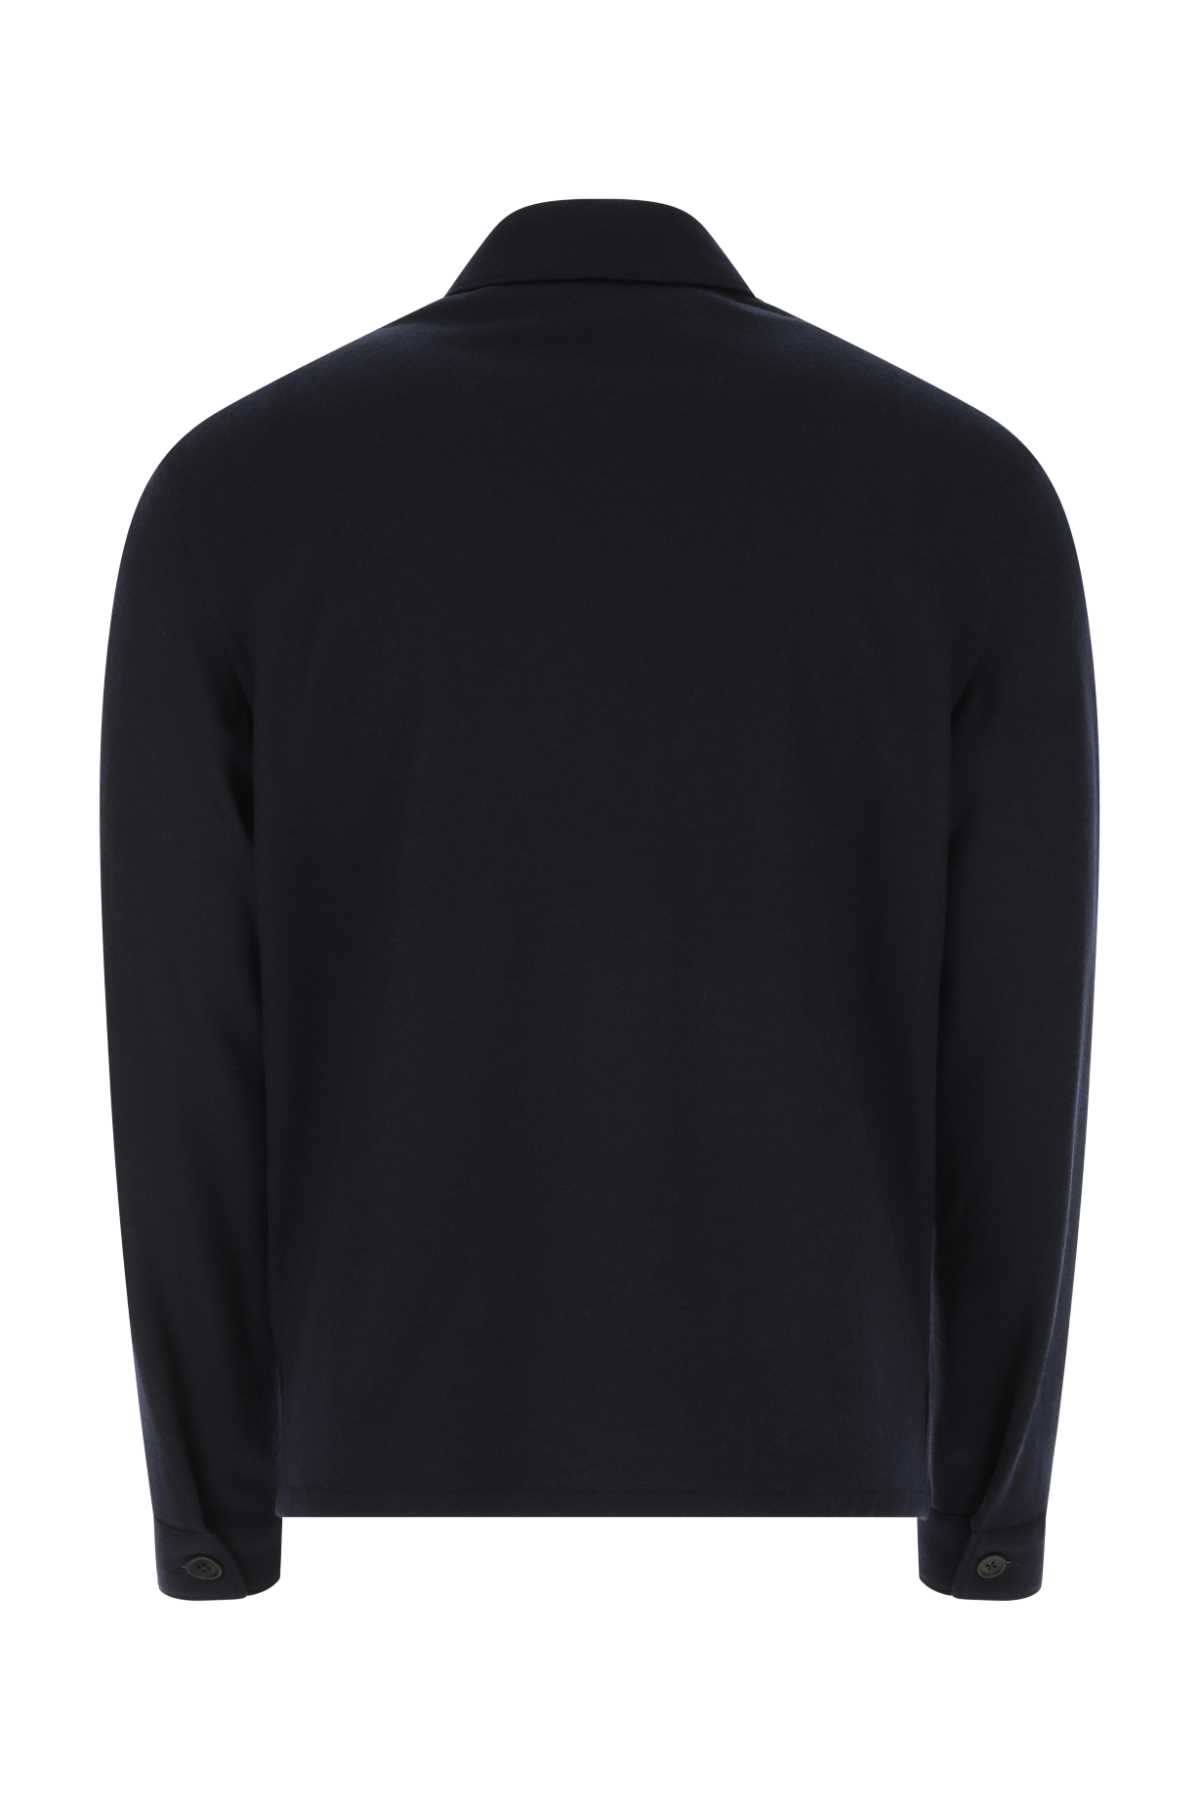 Prada Navy Blue Wool And Cashmere Shirt In F0svf